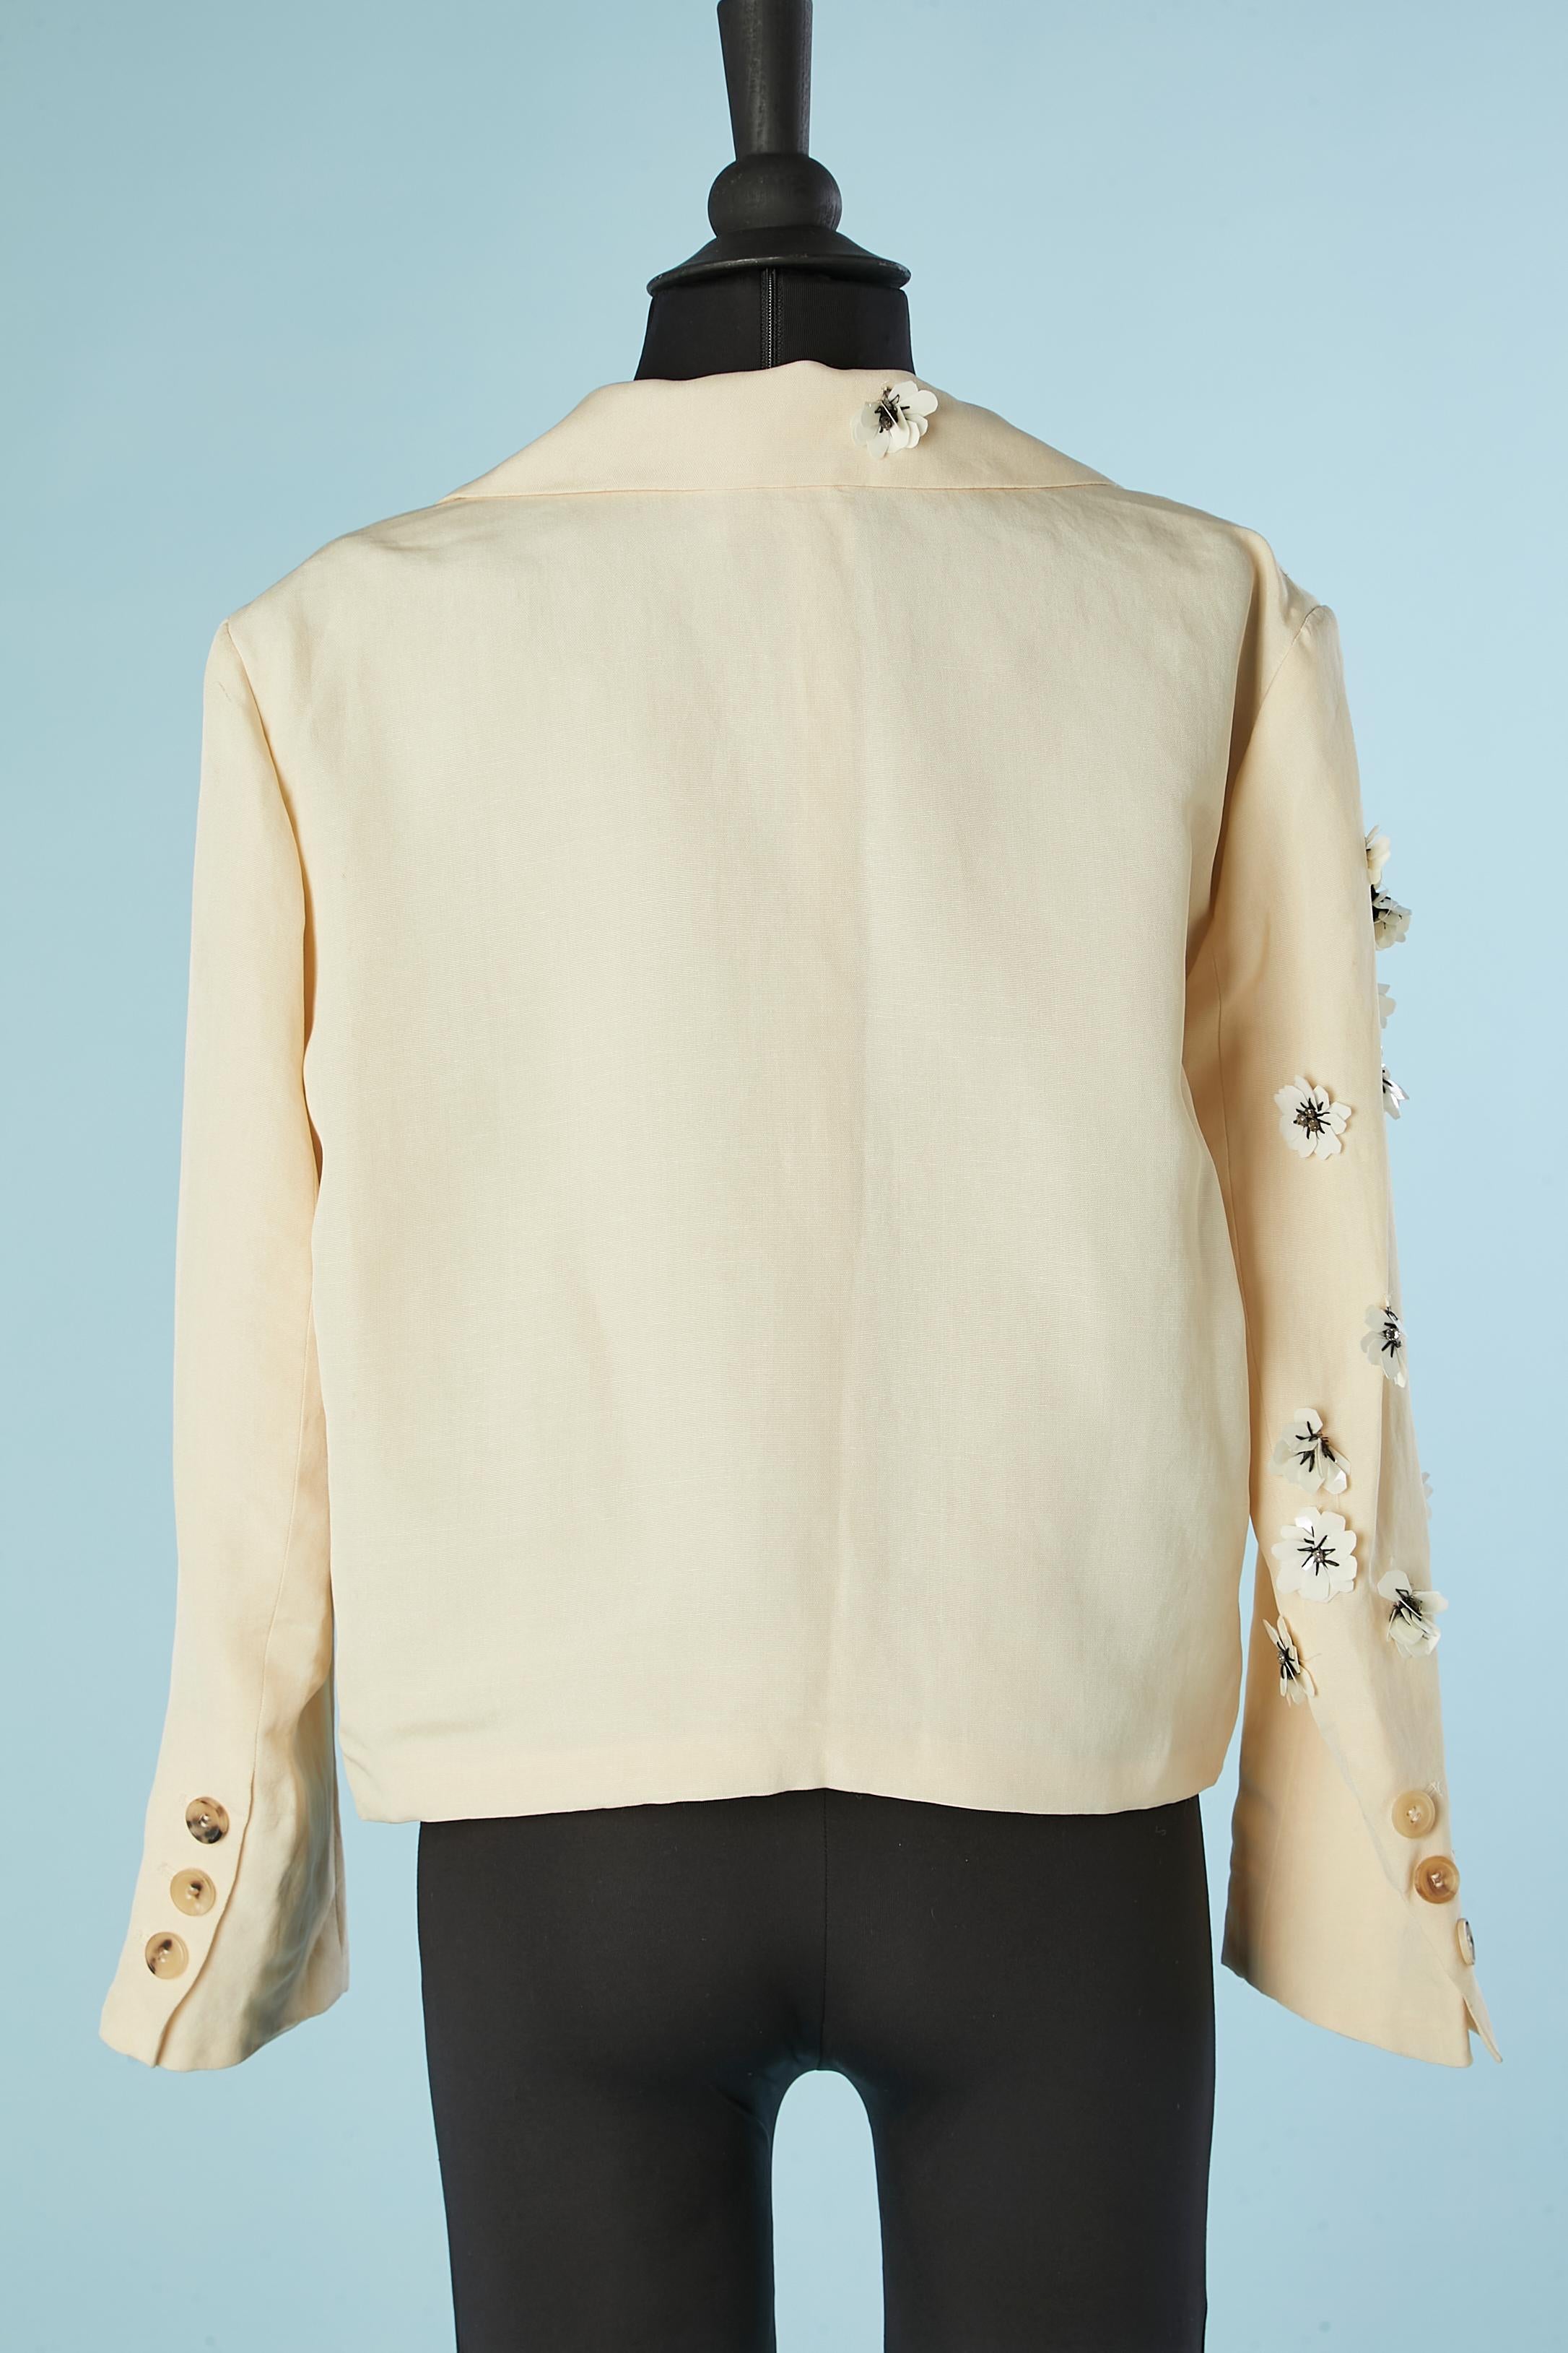 Women's Ivory jacket with PVC and rhinestone flowers application Lanvin by Alber Elbaz 